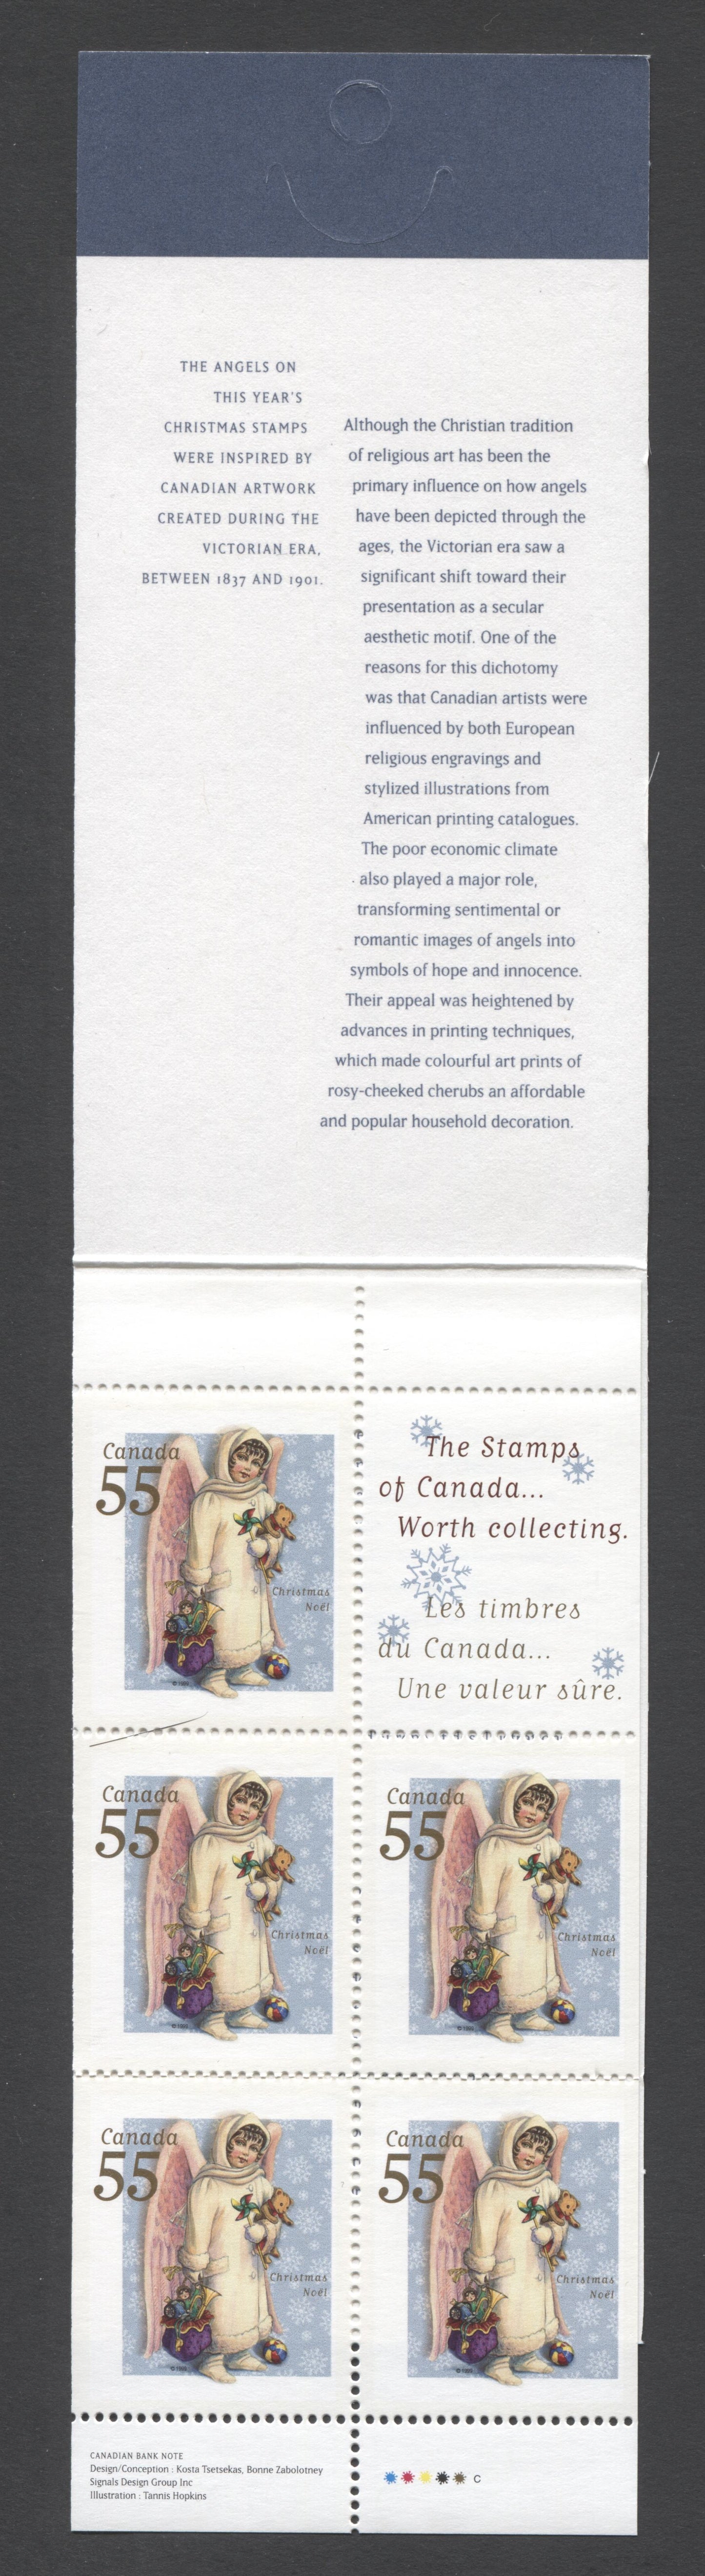 Canada #BK223a 1999 Christmas Issue, Complete $2.75 Booklet, Tullis Russell Coatings Paper, Dead Paper, 4 mm GT-4 Tagging